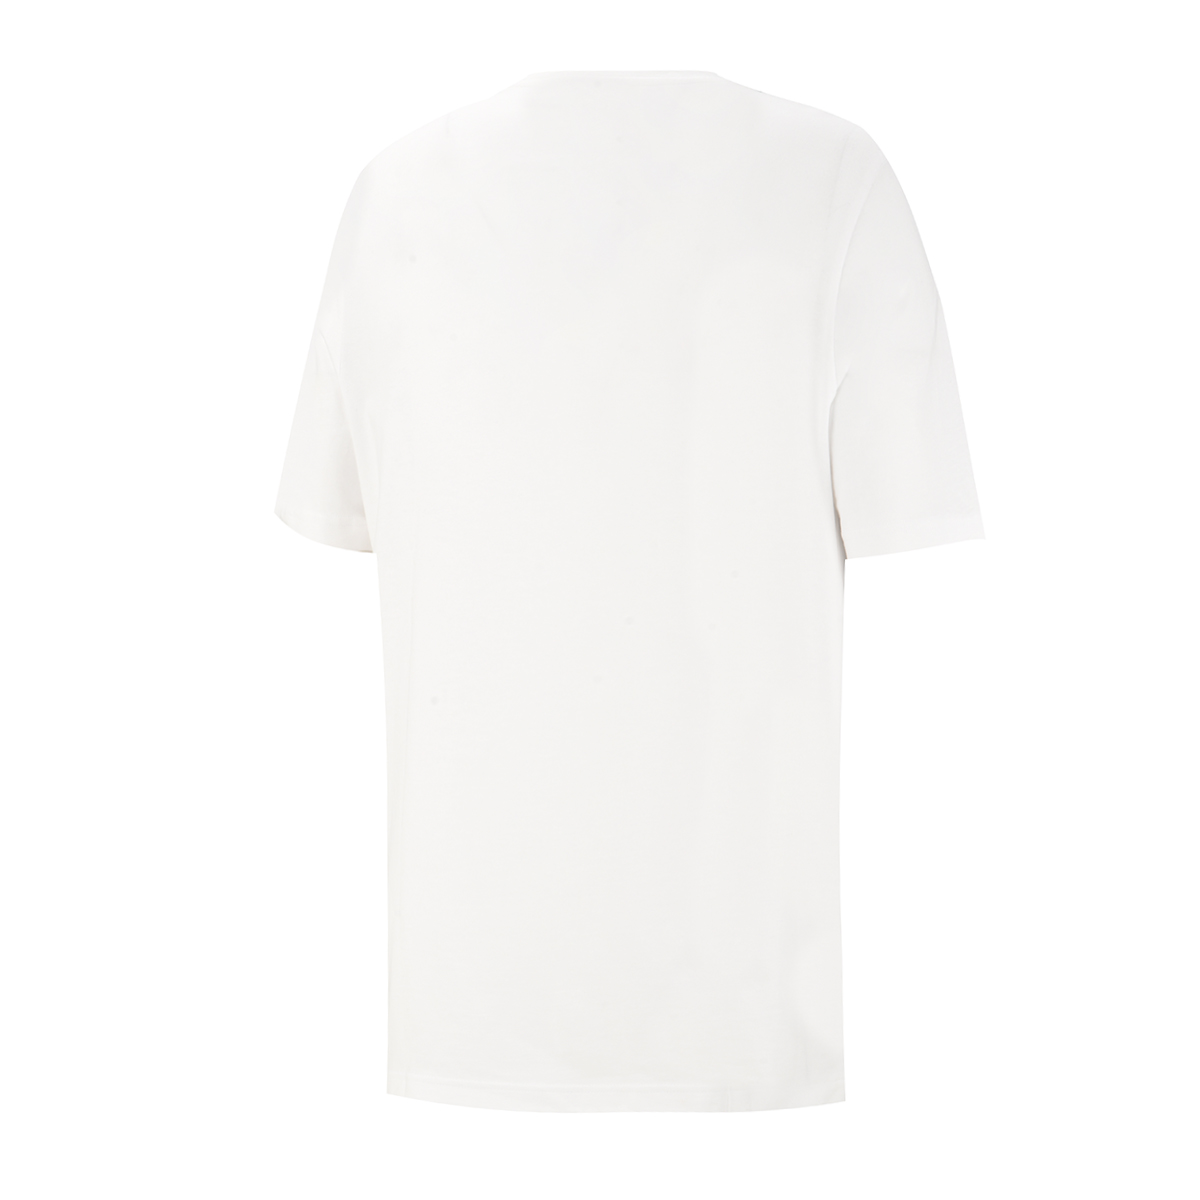 Remera Reebok Cl F Vector Hombre,  image number null